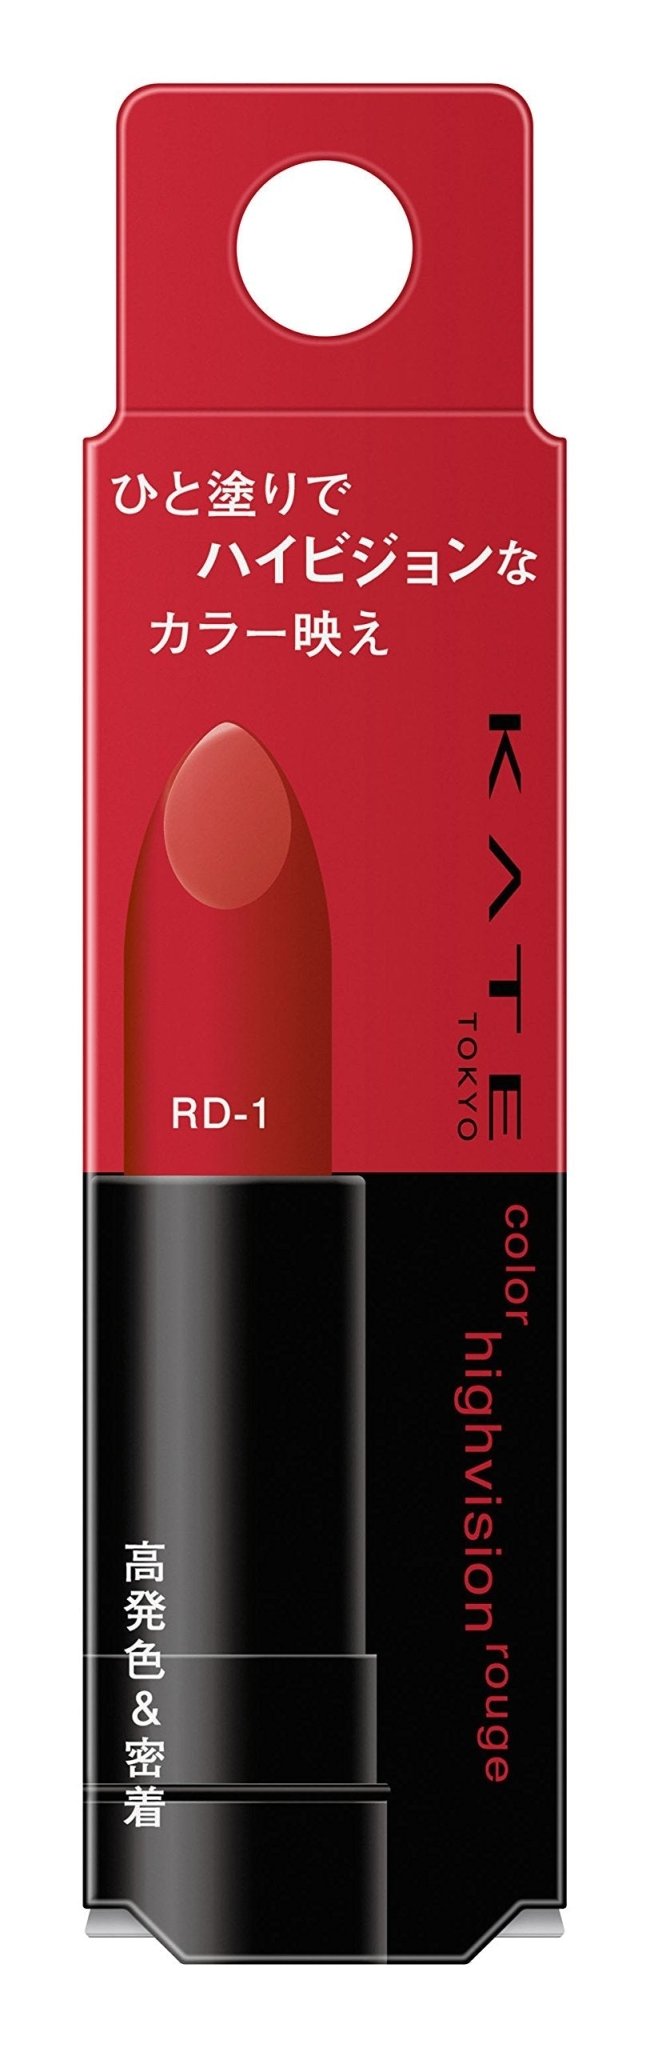 Kate High Vision Rouge Rd - 1 Vibrant Rouge Color Makeup